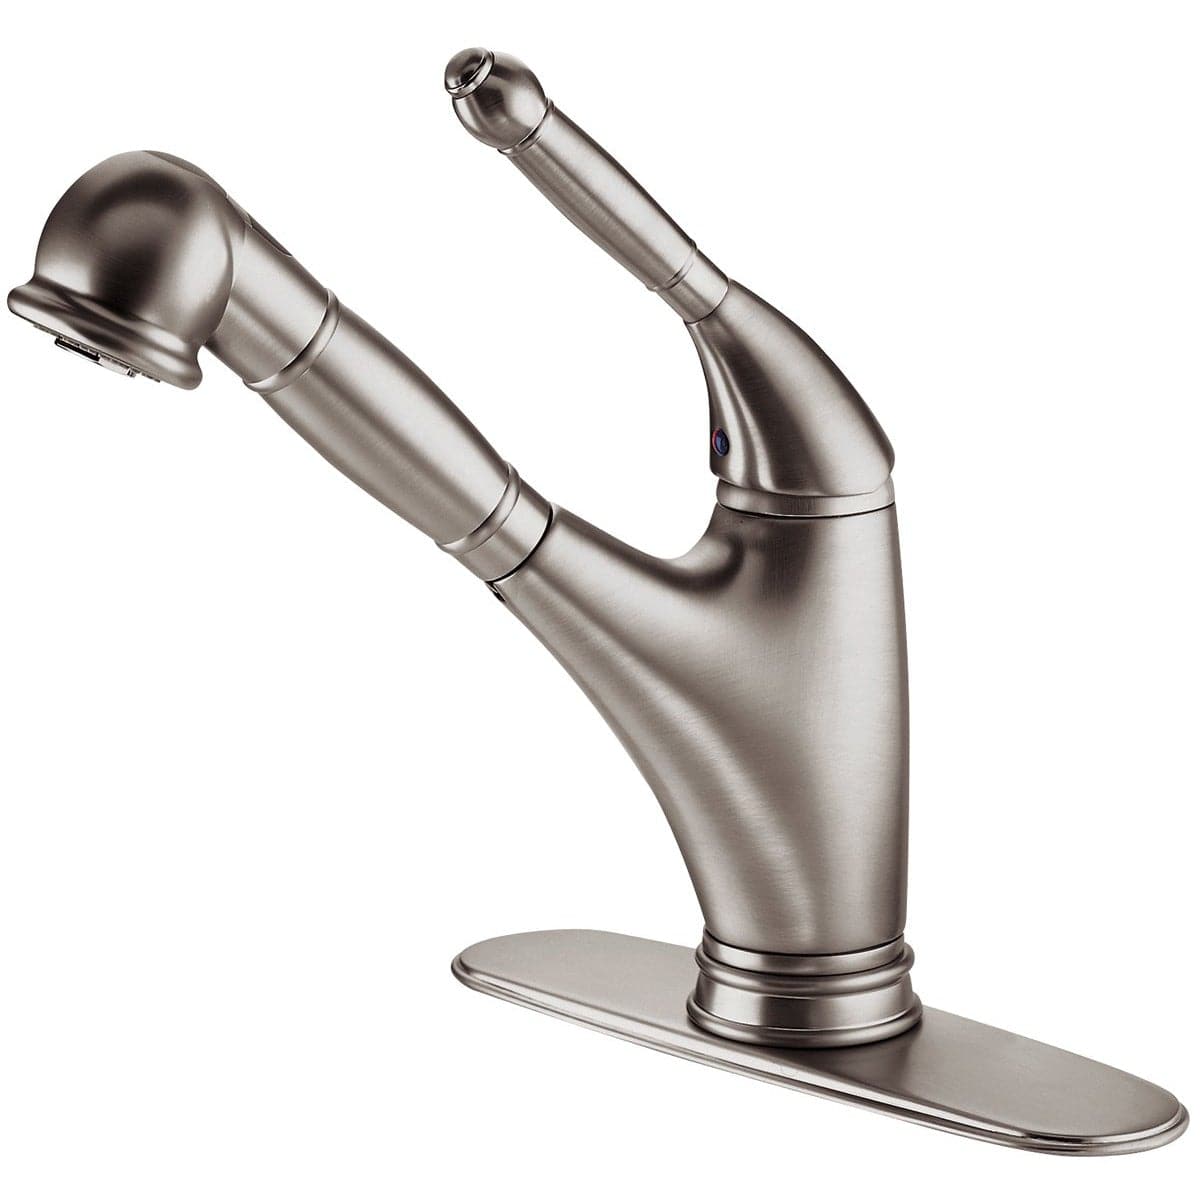 LATOSCANA Single Handle Pull-Out Spray Kitchen Faucet, Chrome - USCR576